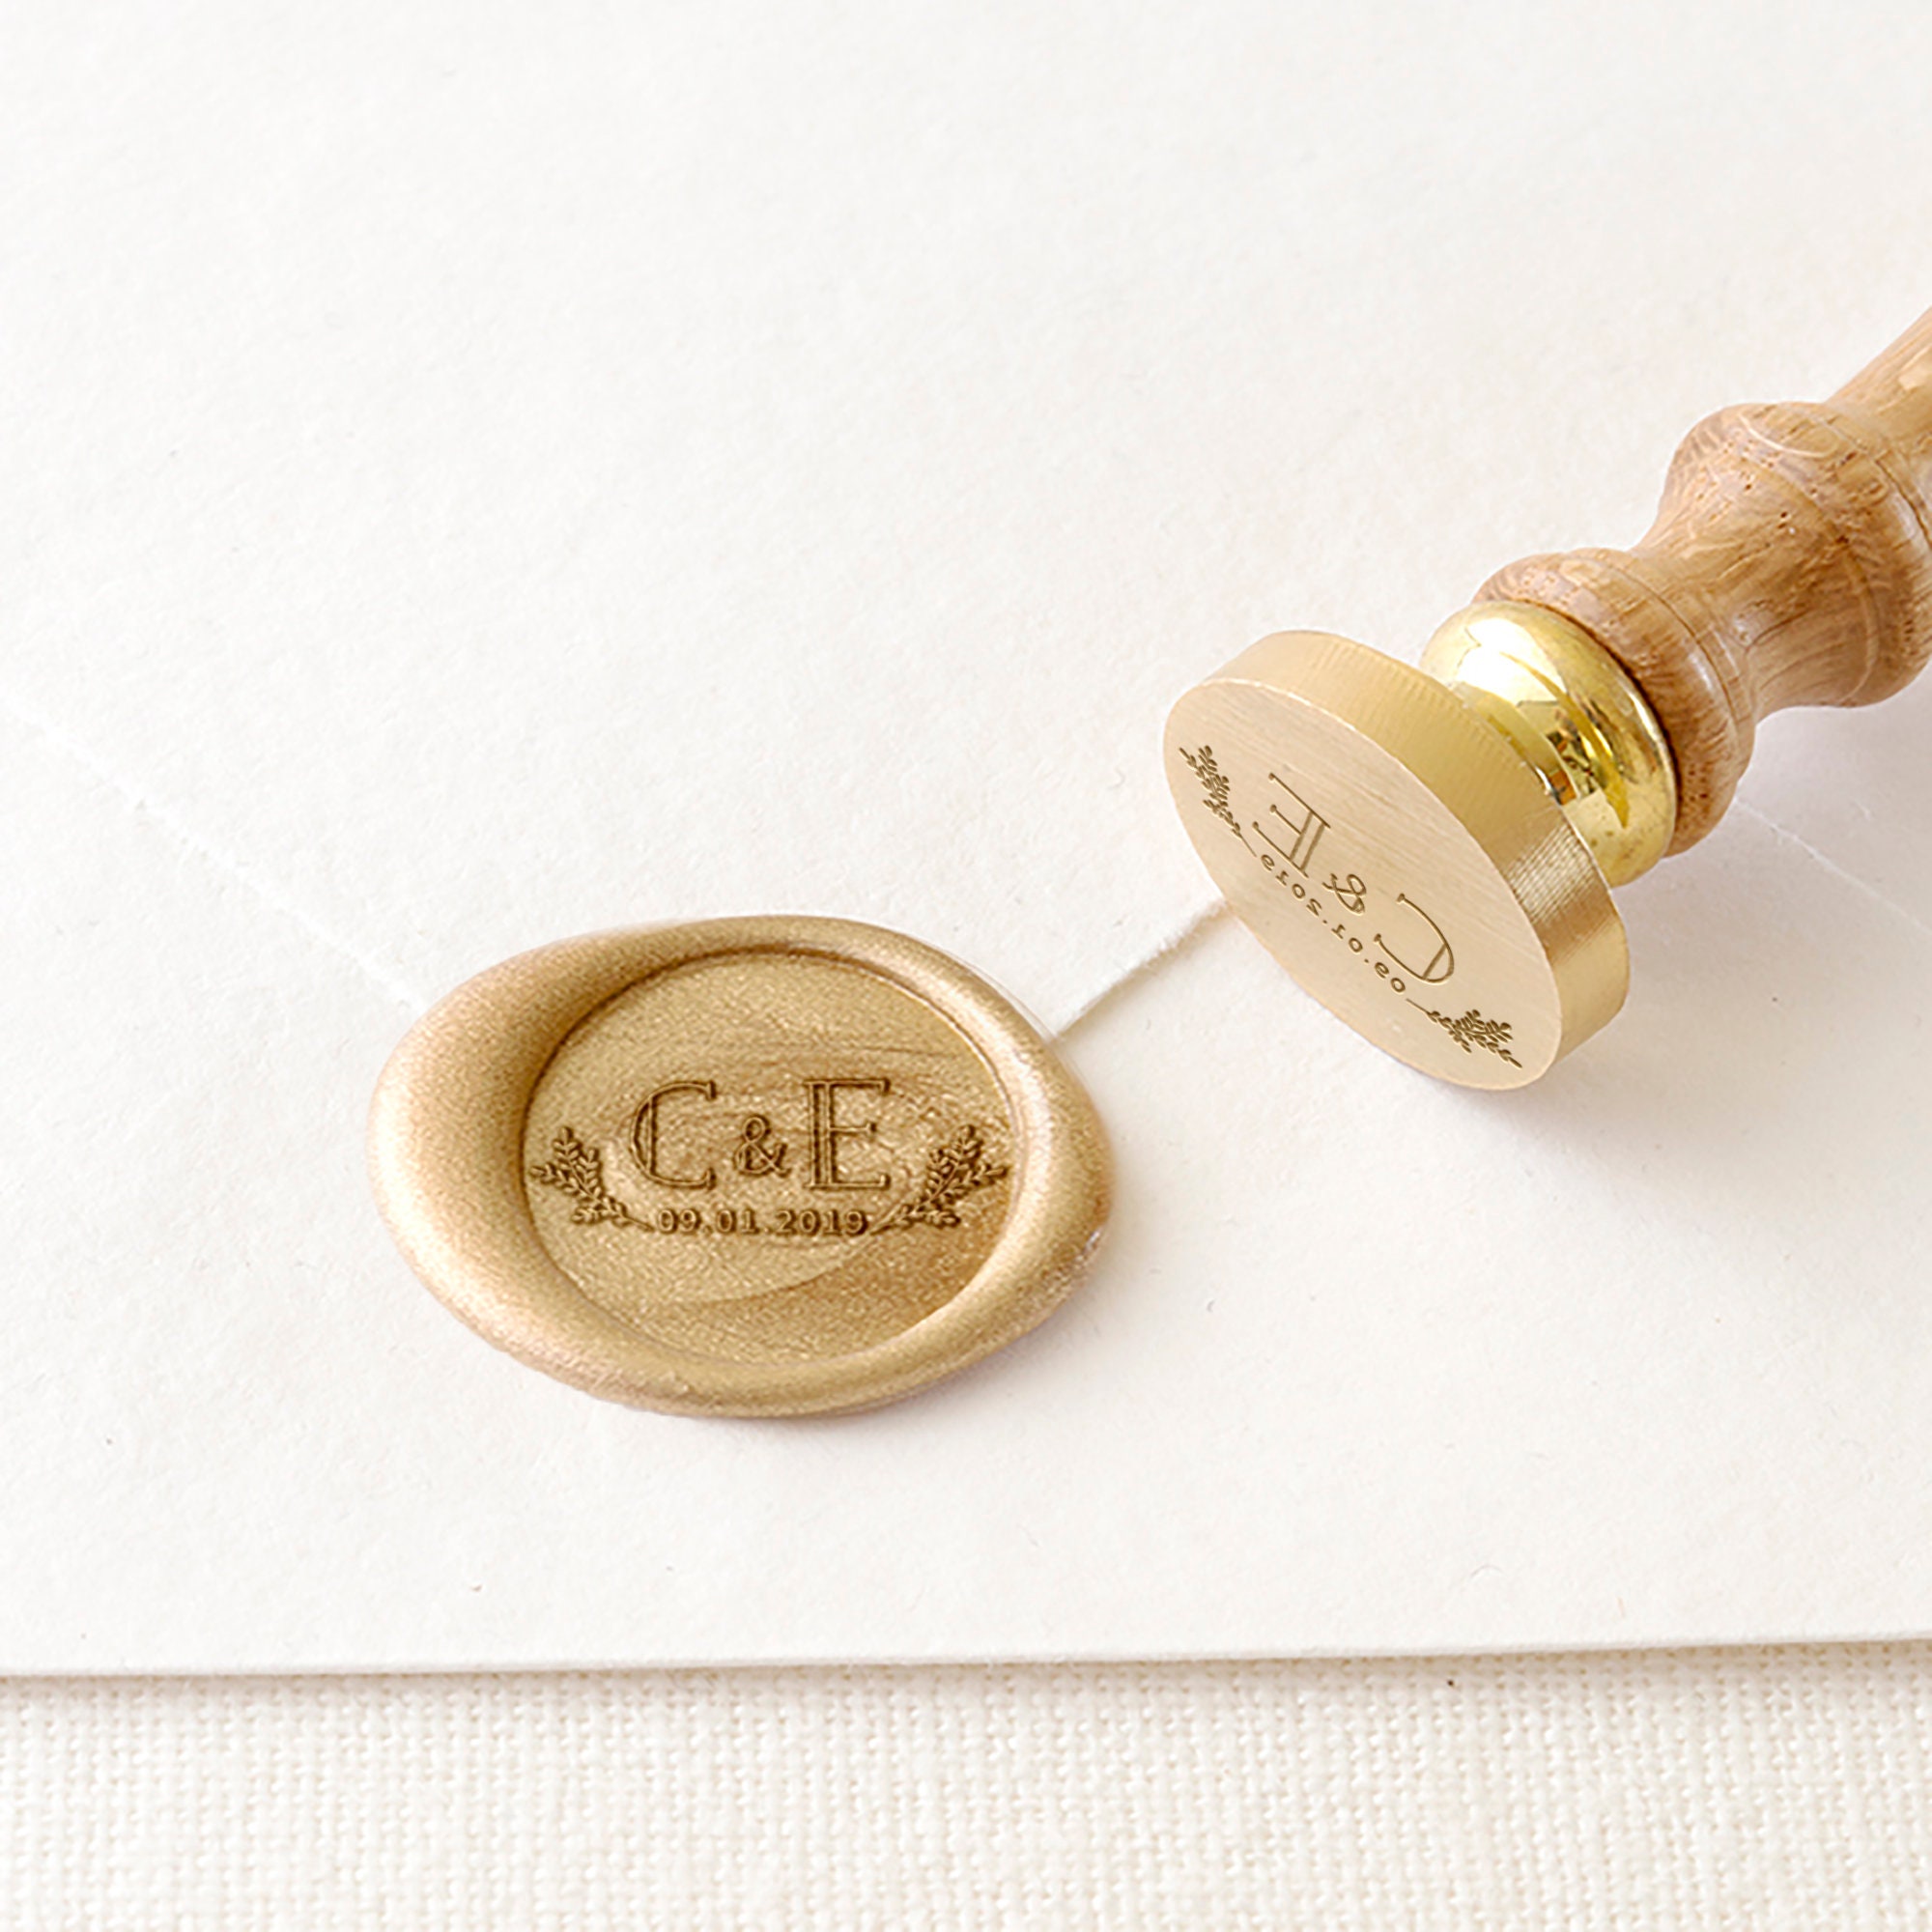 Ready Made Wax Seal Stamp - Floral Initial Wax Seal Stamp